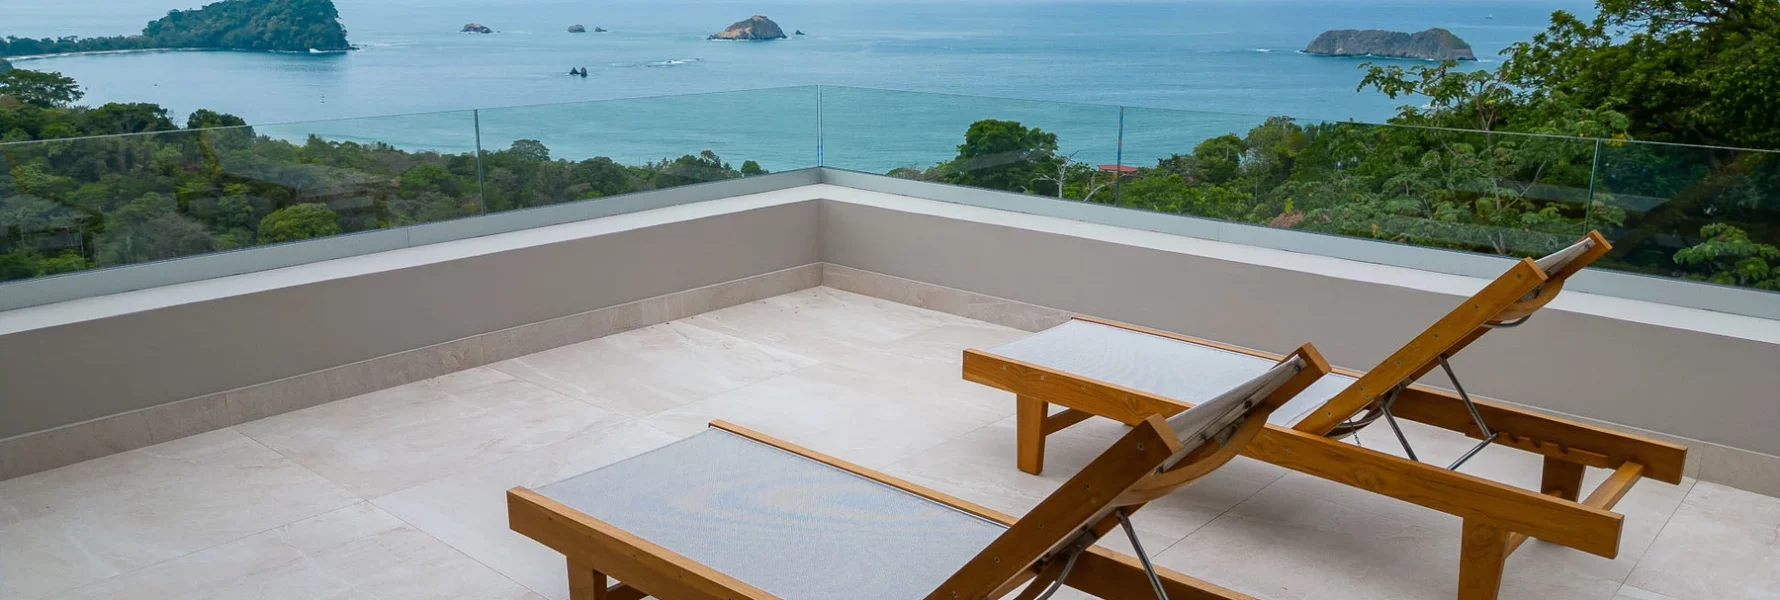 The rooftop terrace offers ample space to lounge while admiring the ocean vista.